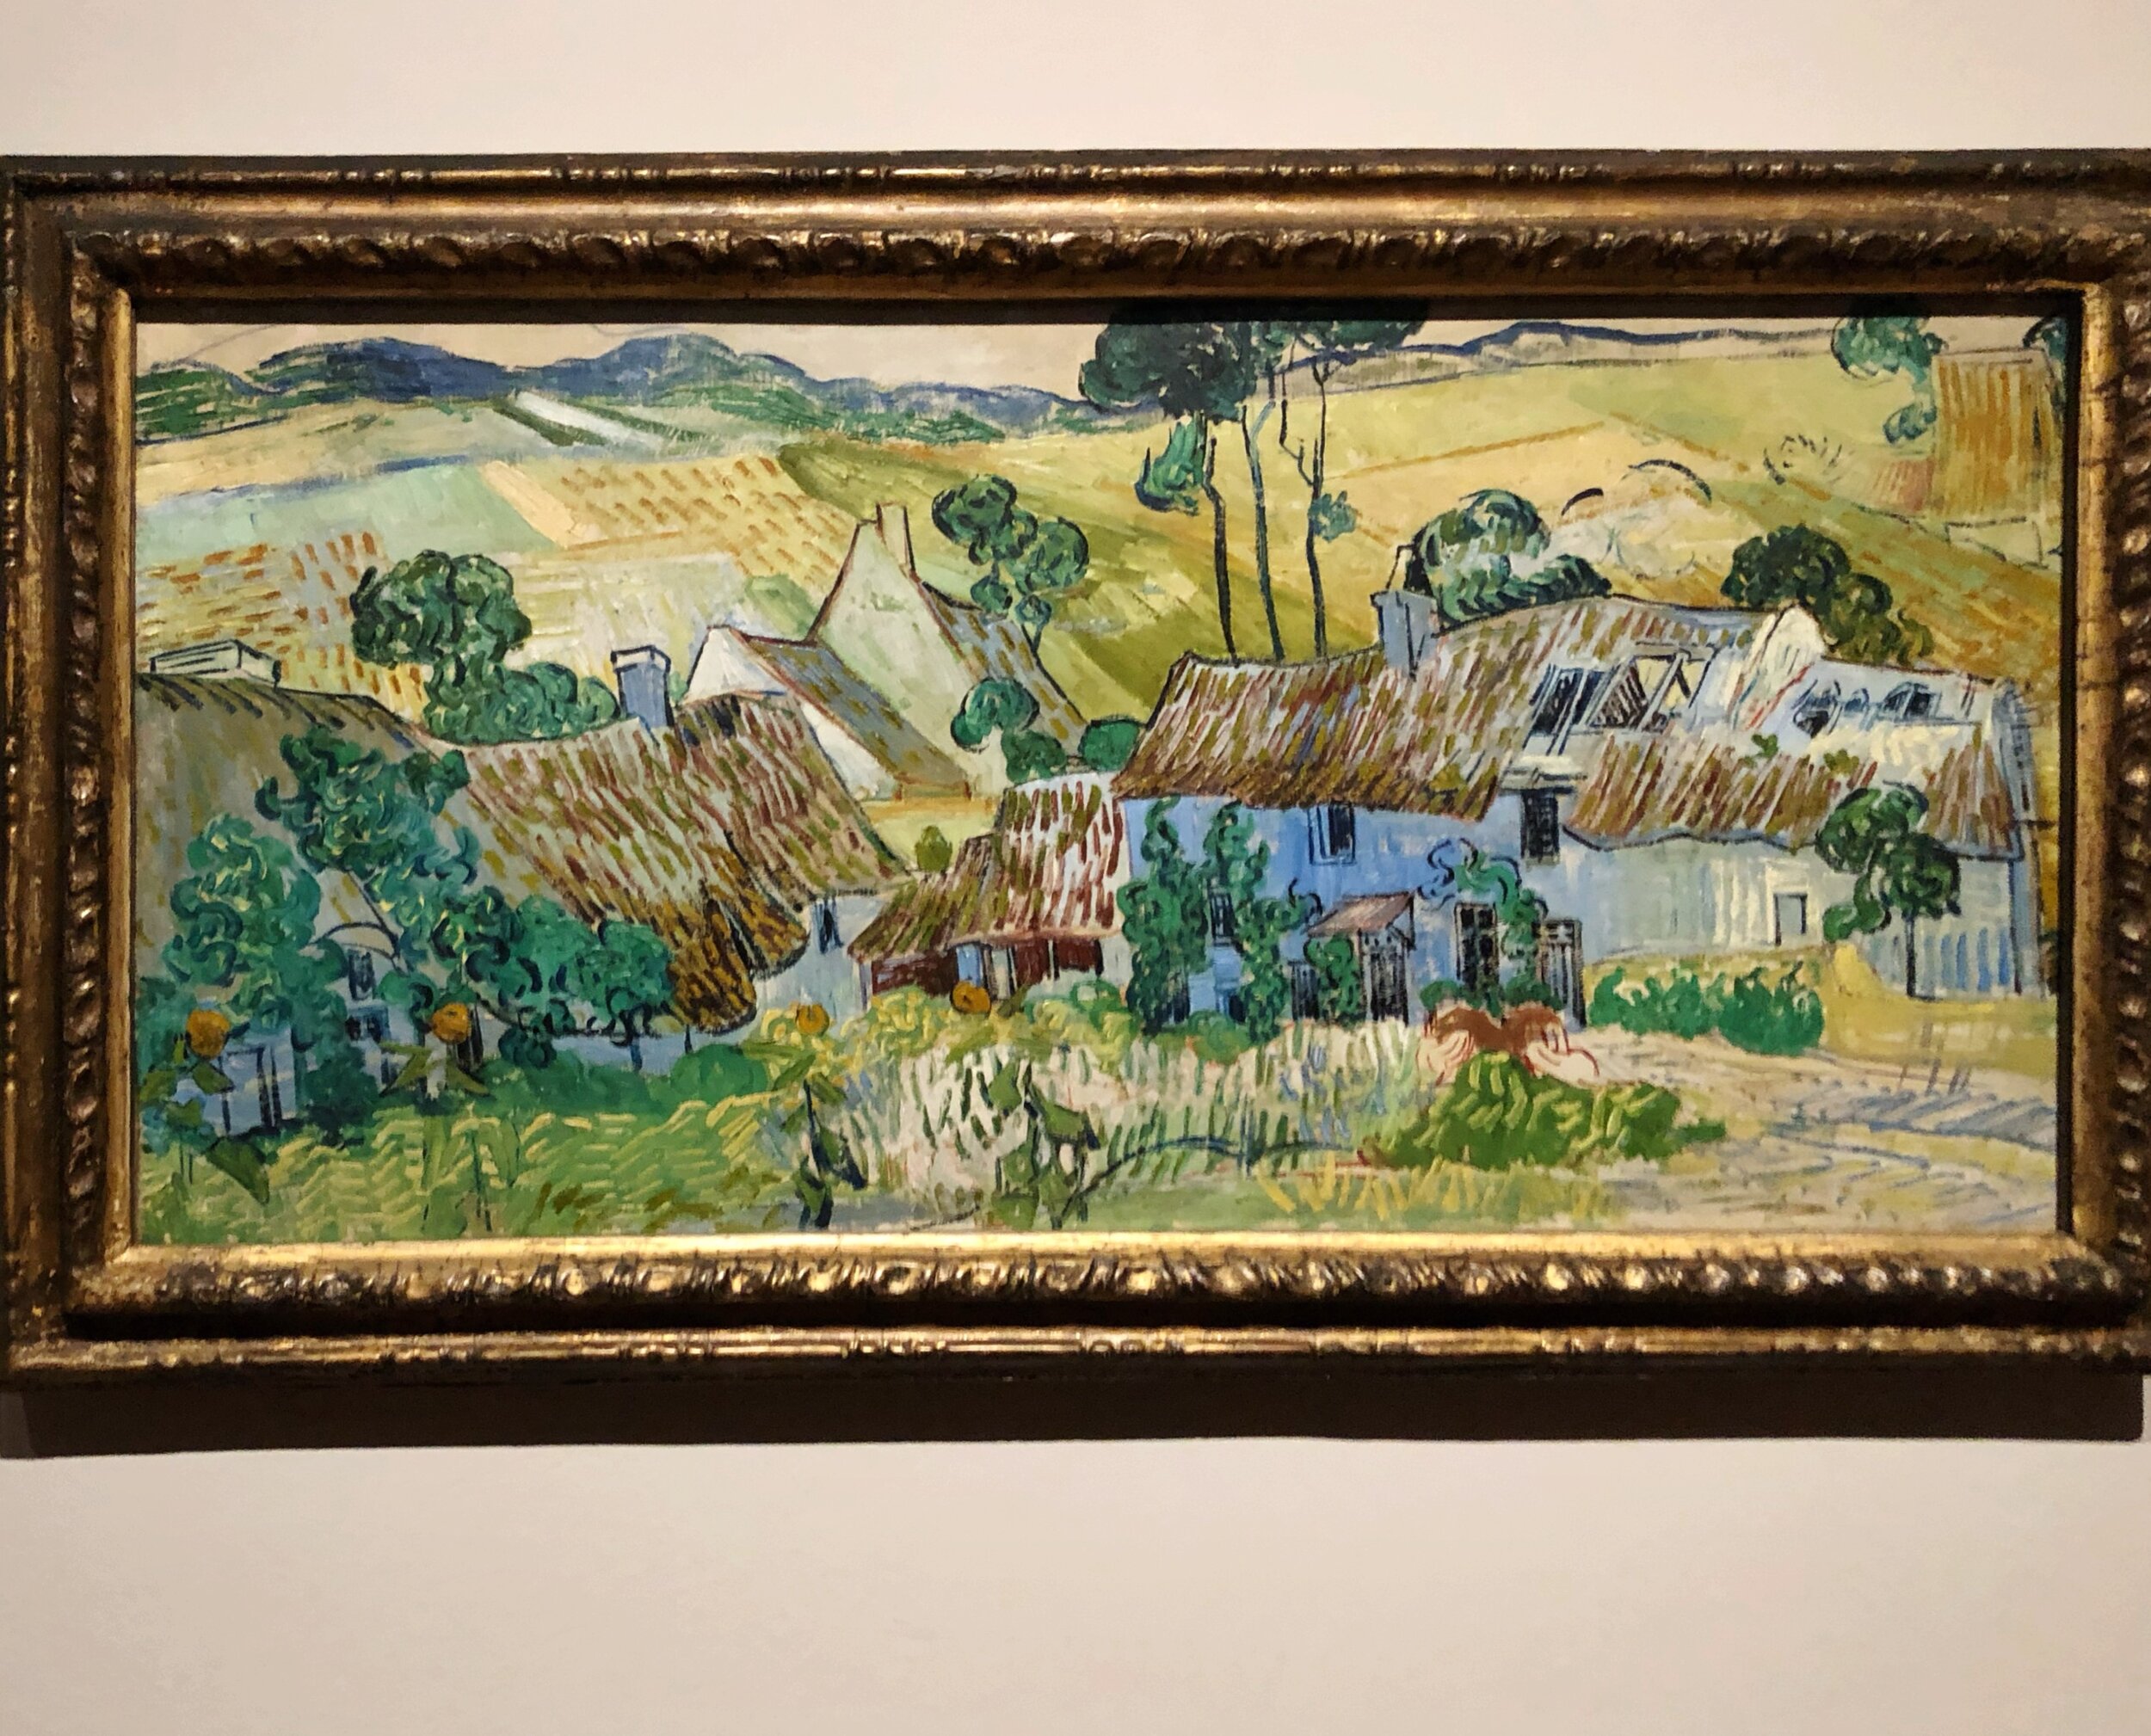   Farms Near Auvers.  This unfinished painting is believed to be one of two paintings he was working on when he died.  